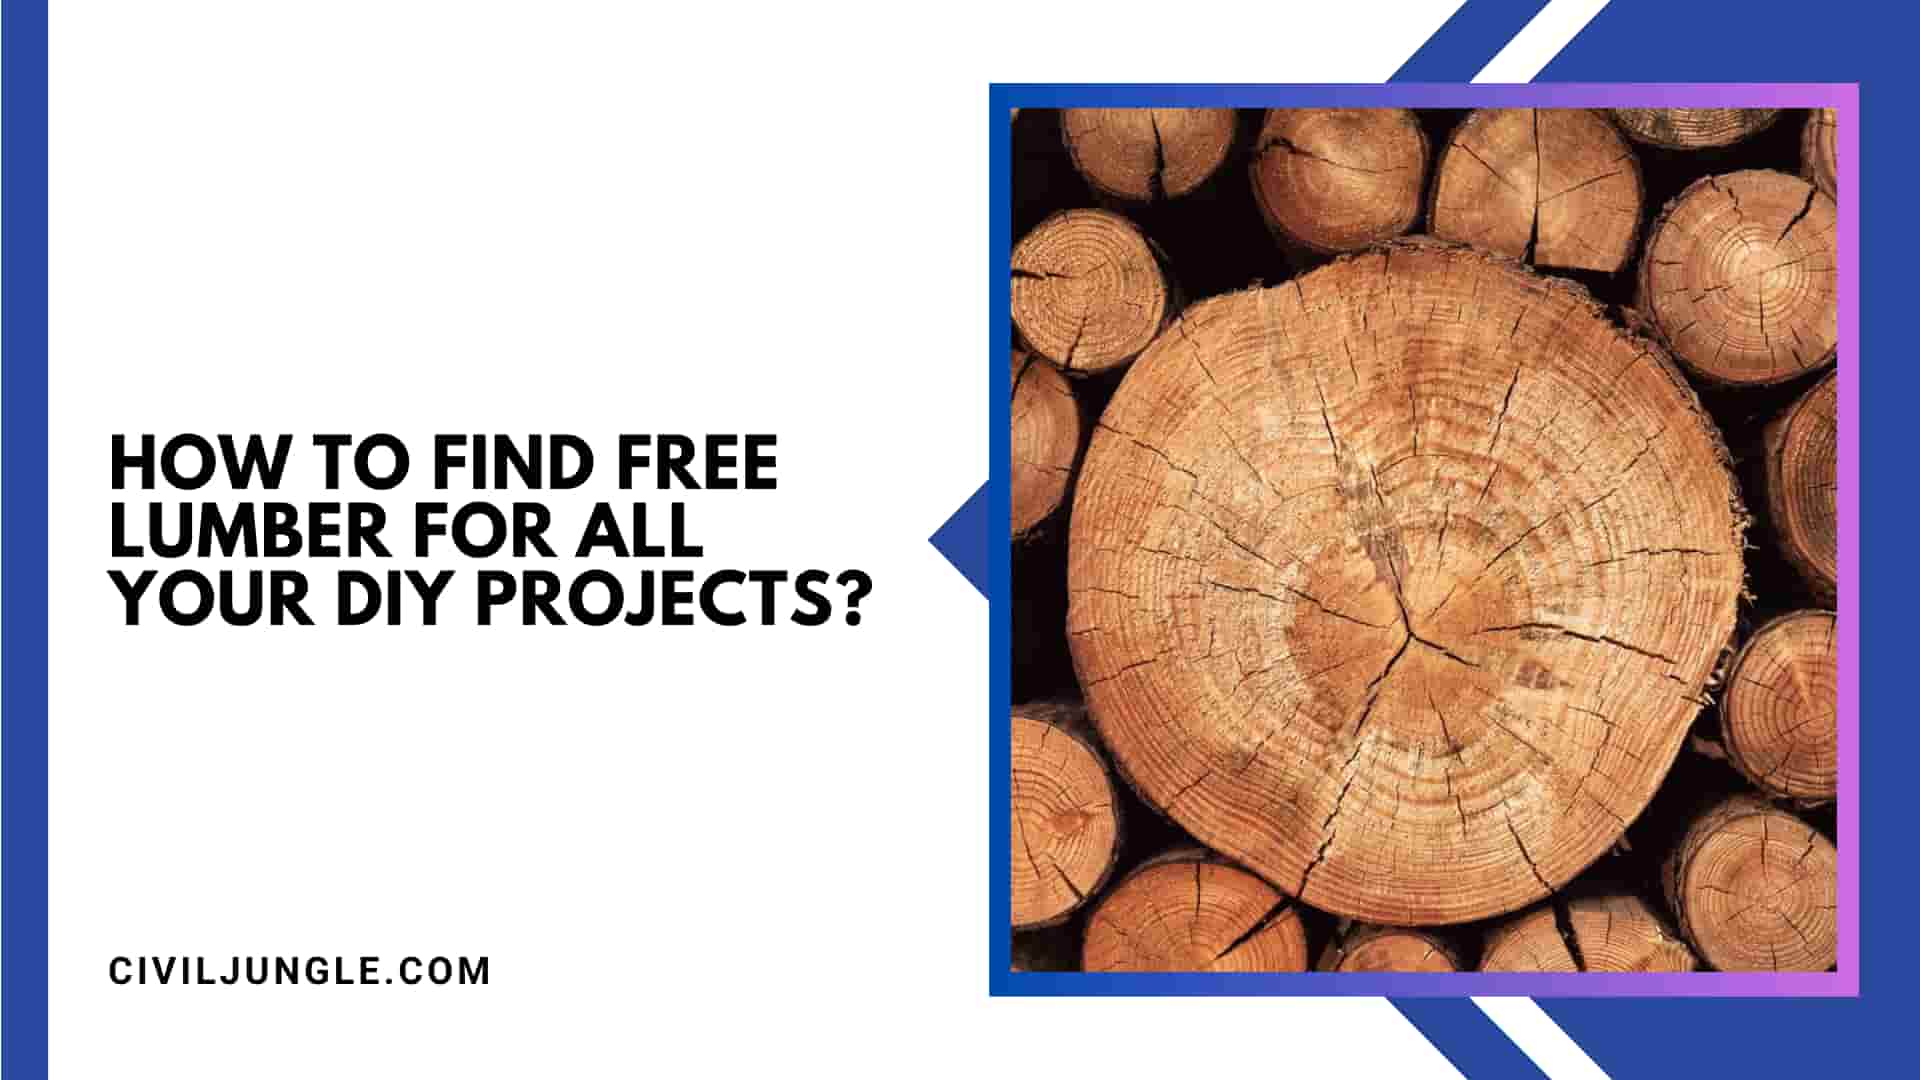 How to Find Free Lumber for All Your Diy Projects?